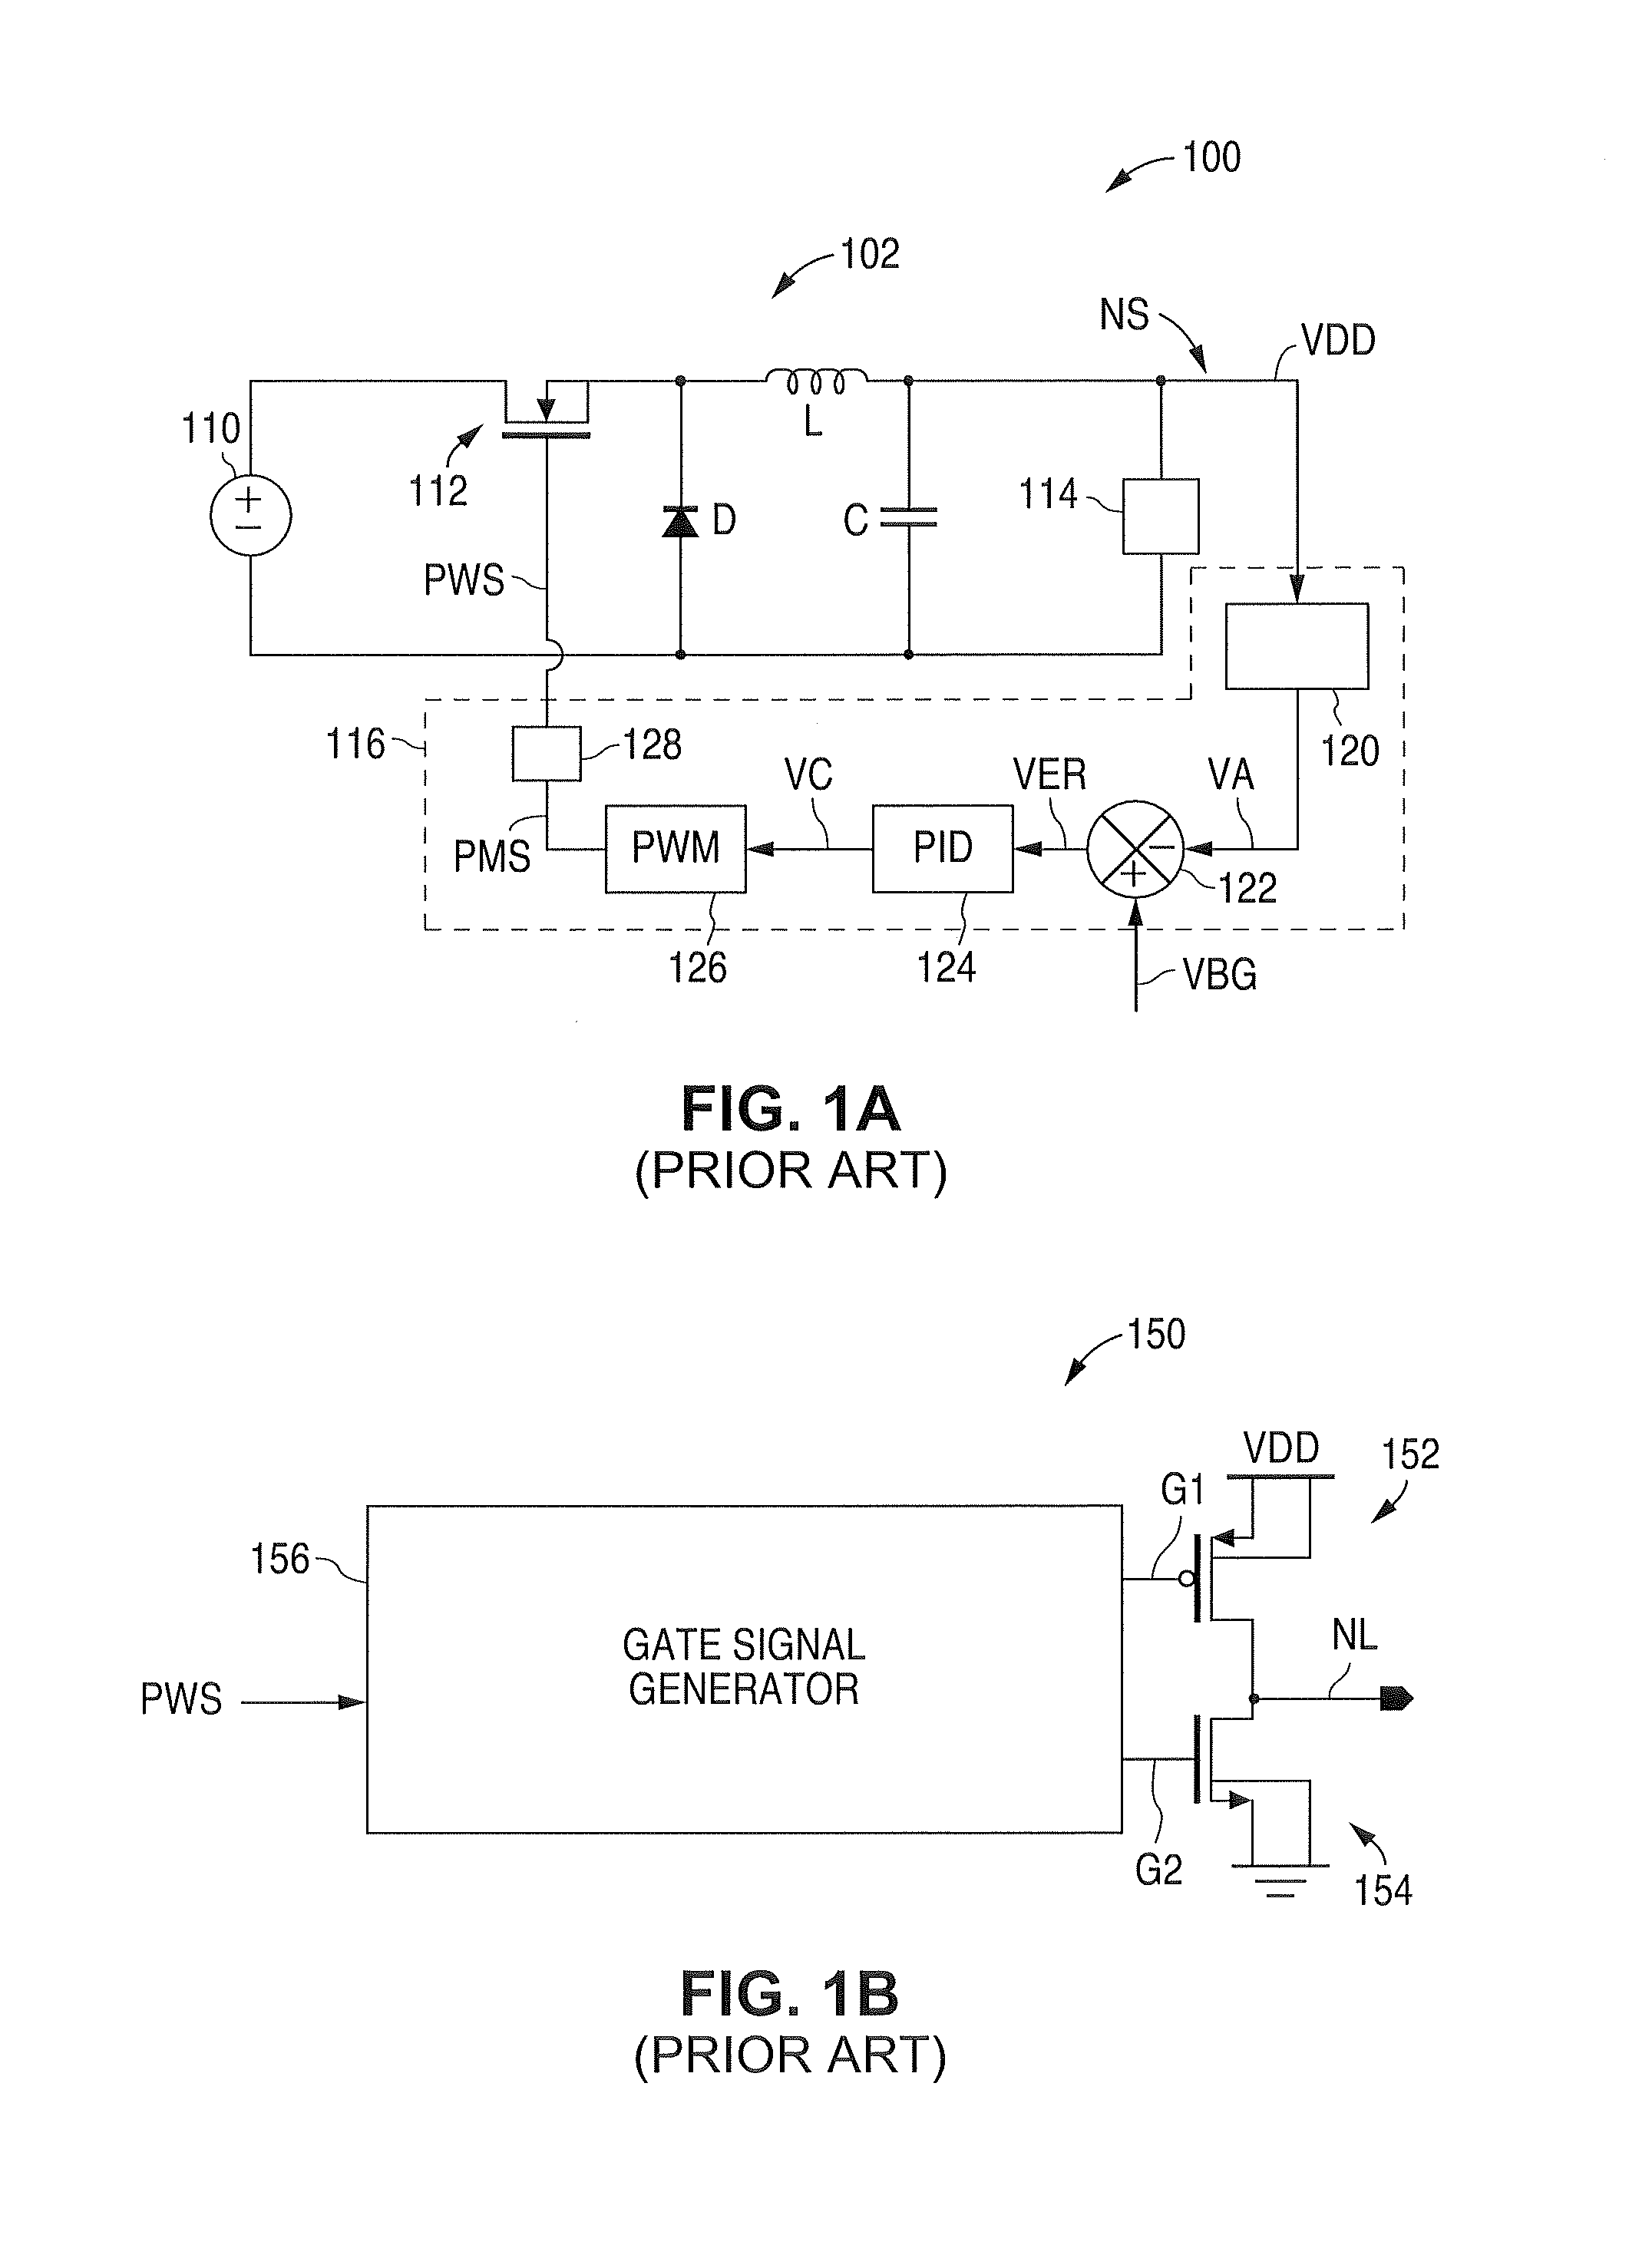 System and method for providing a digital self-adjusting power supply that provides a substantially constant minimum supply voltage with regard to variations of PVT, load, and frequency